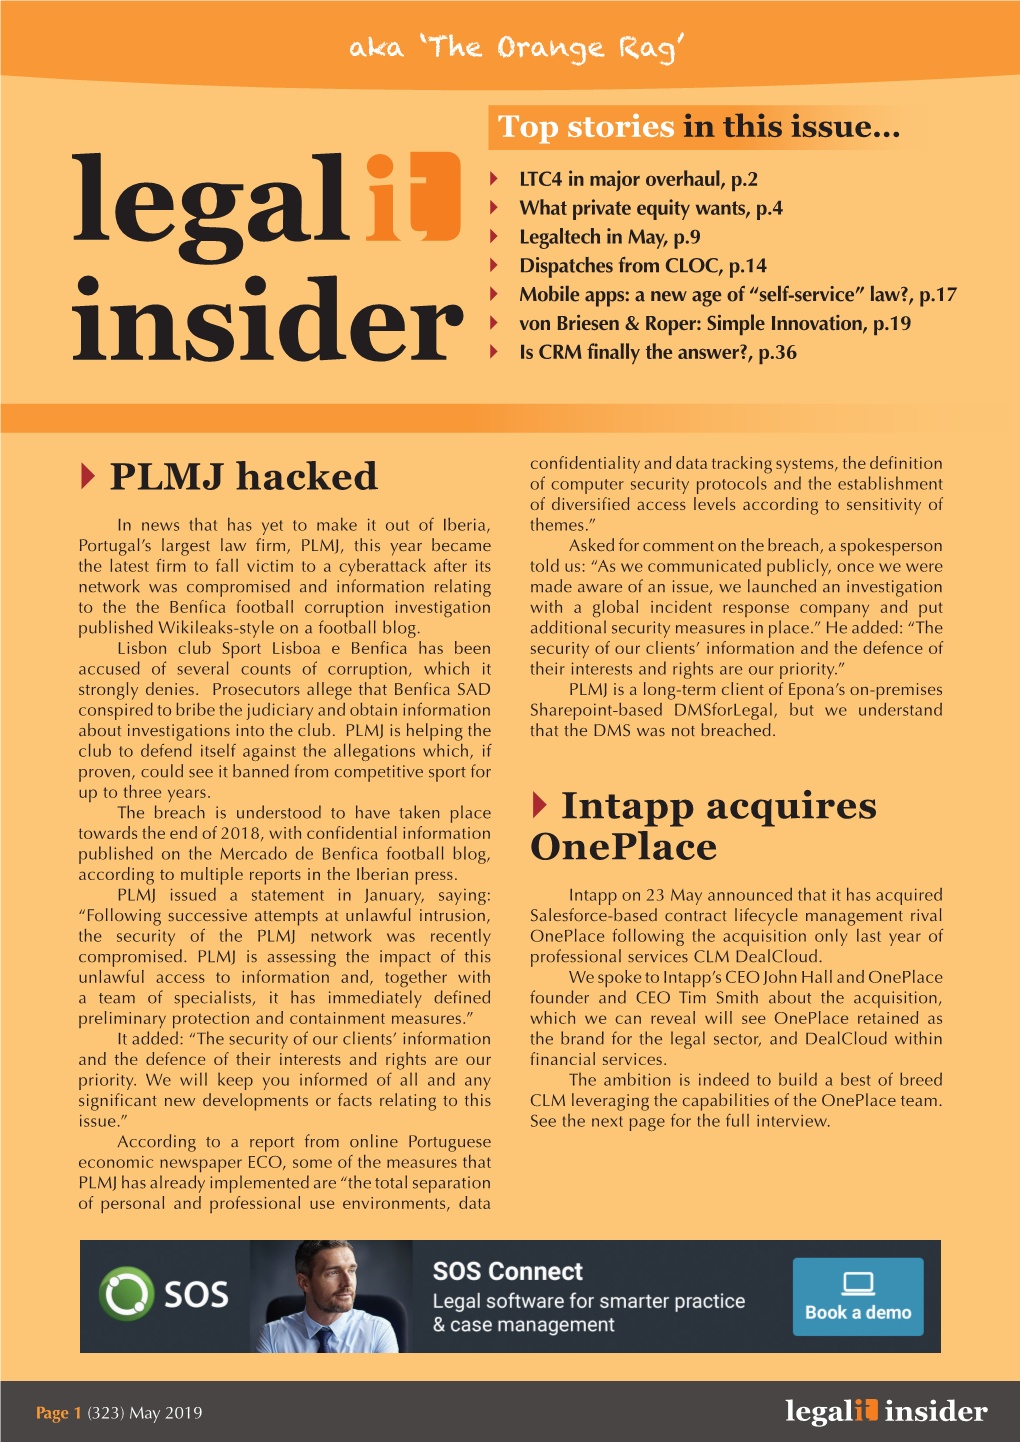 PLMJ Hacked Intapp Acquires Oneplace